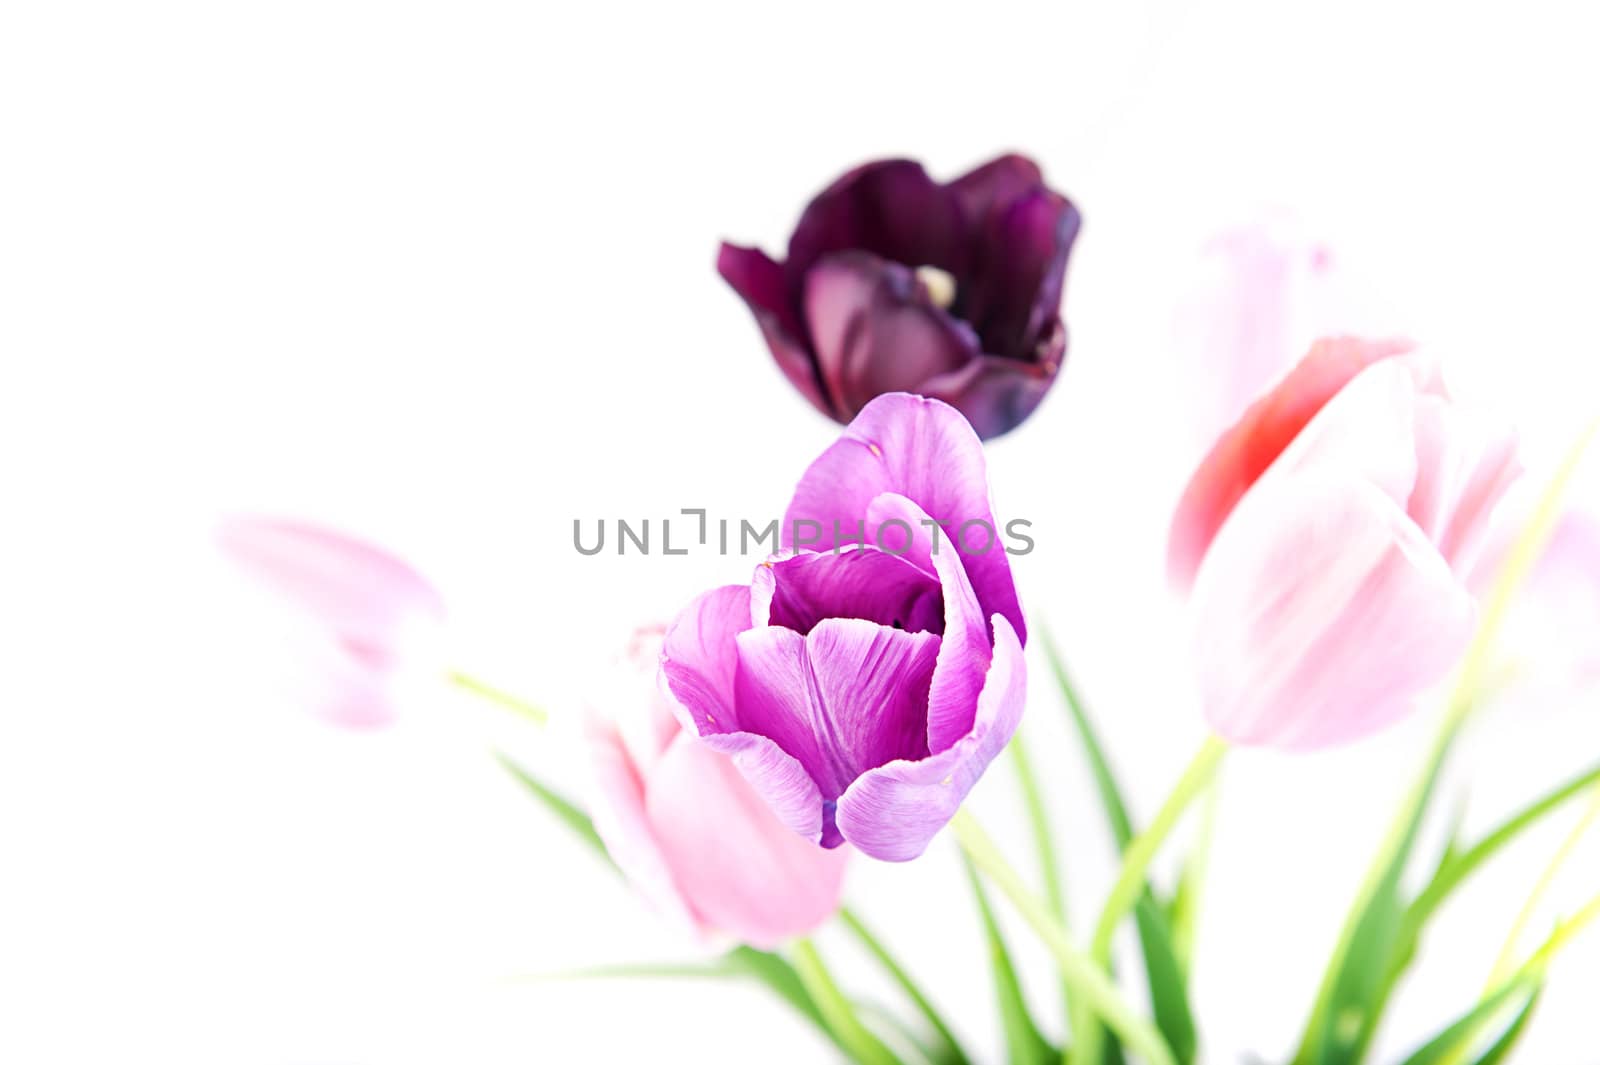 Bunch of beautiful bright spring flowers - colorful tulips against white background. Shallow DOF